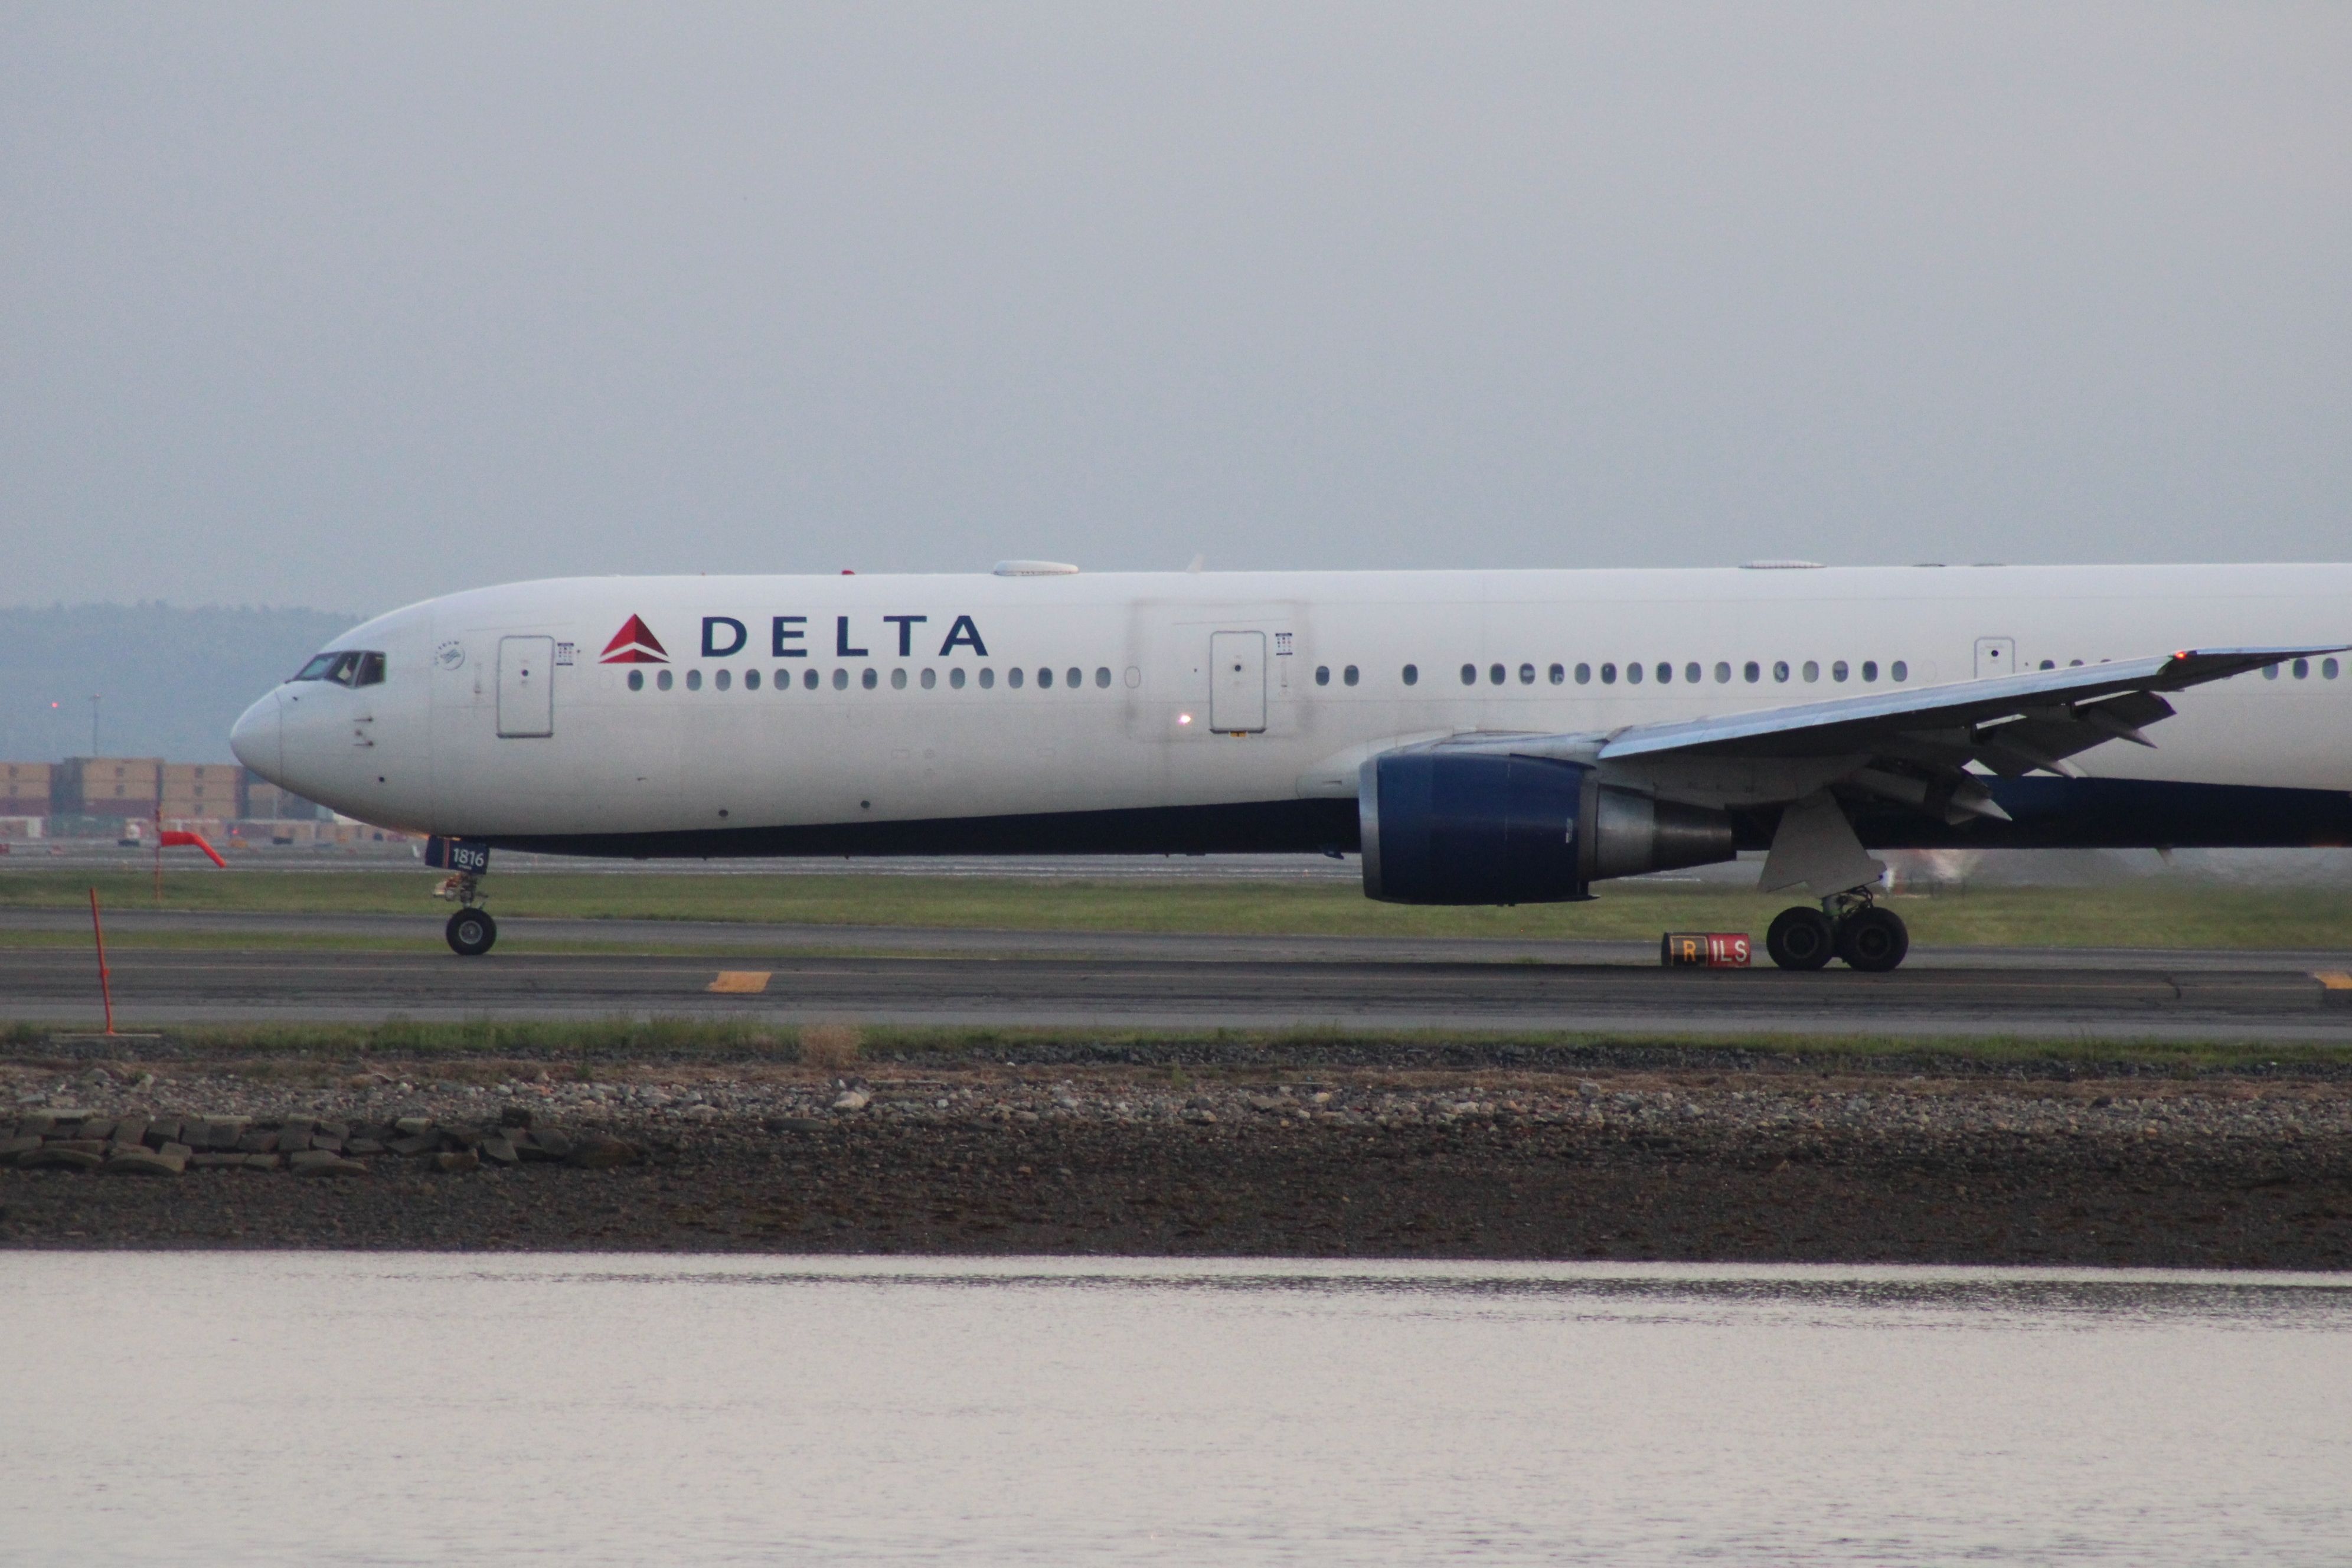 A Delta Air Lines Boeing 767-400ER on an airport apron.